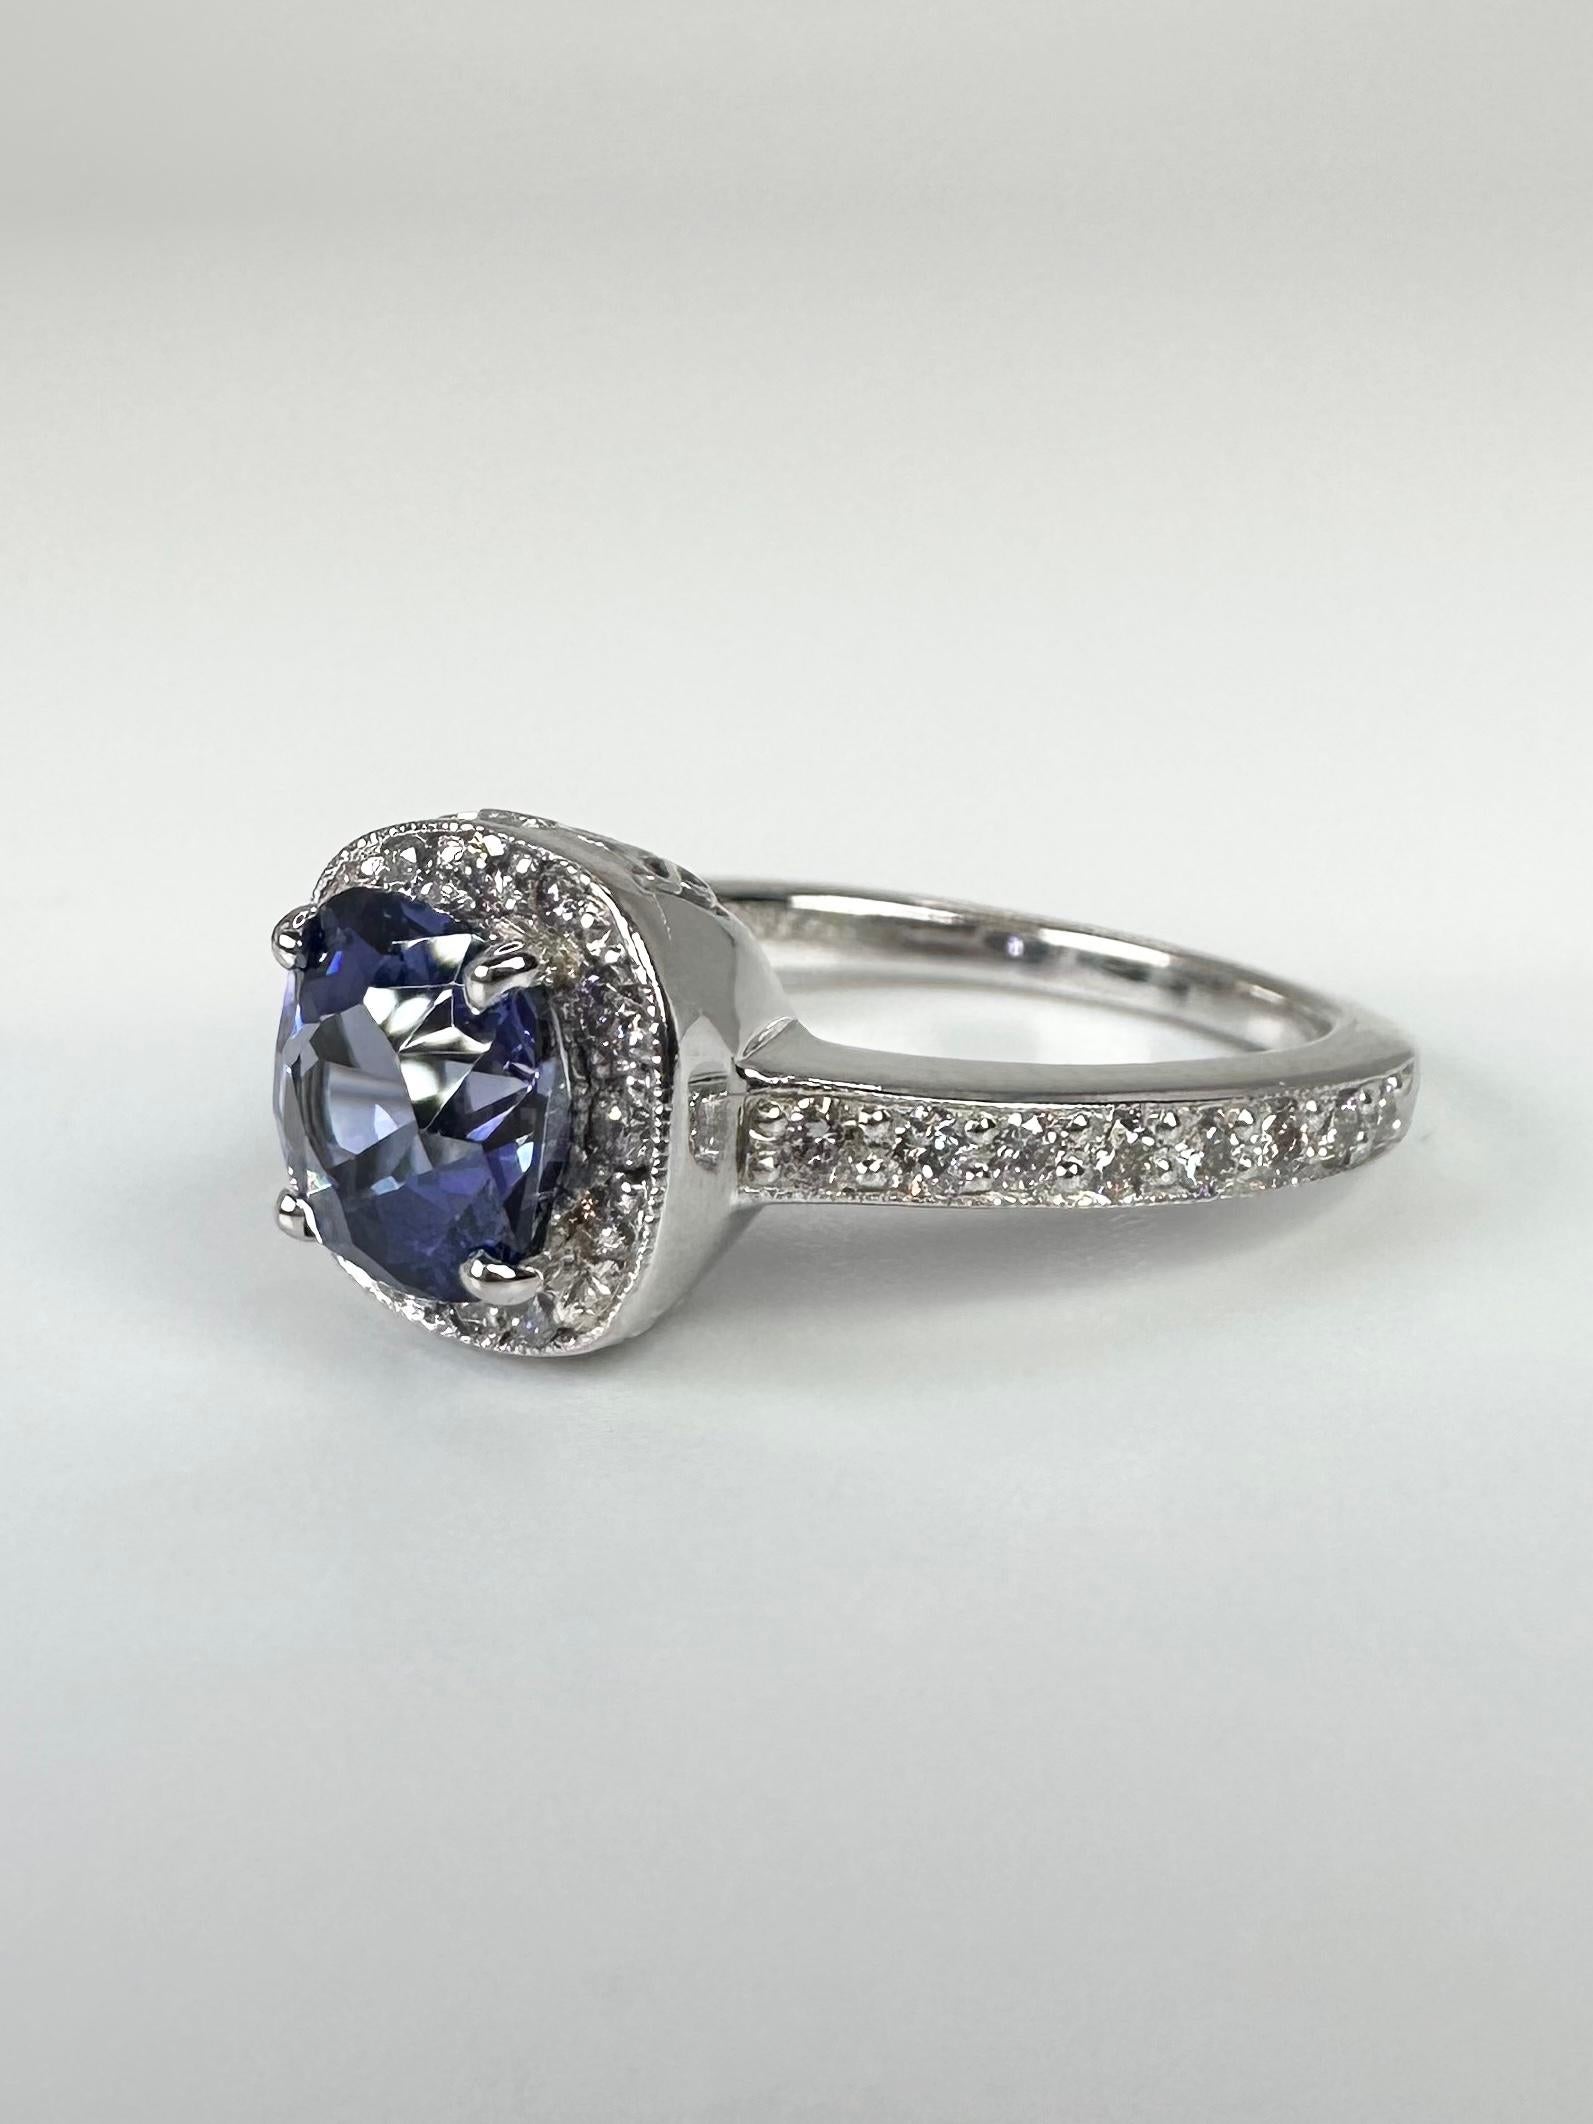 Important Tanzanite ring flanked by a diamond on either side, made with a gentle halo in platinum. Stunning rare color!

GOLD: 14KT white gold
NATURAL TANZANITE(S)
Clarity/Color: Slightly Included/Light Violet
Carat:0.80ct
NATURAL